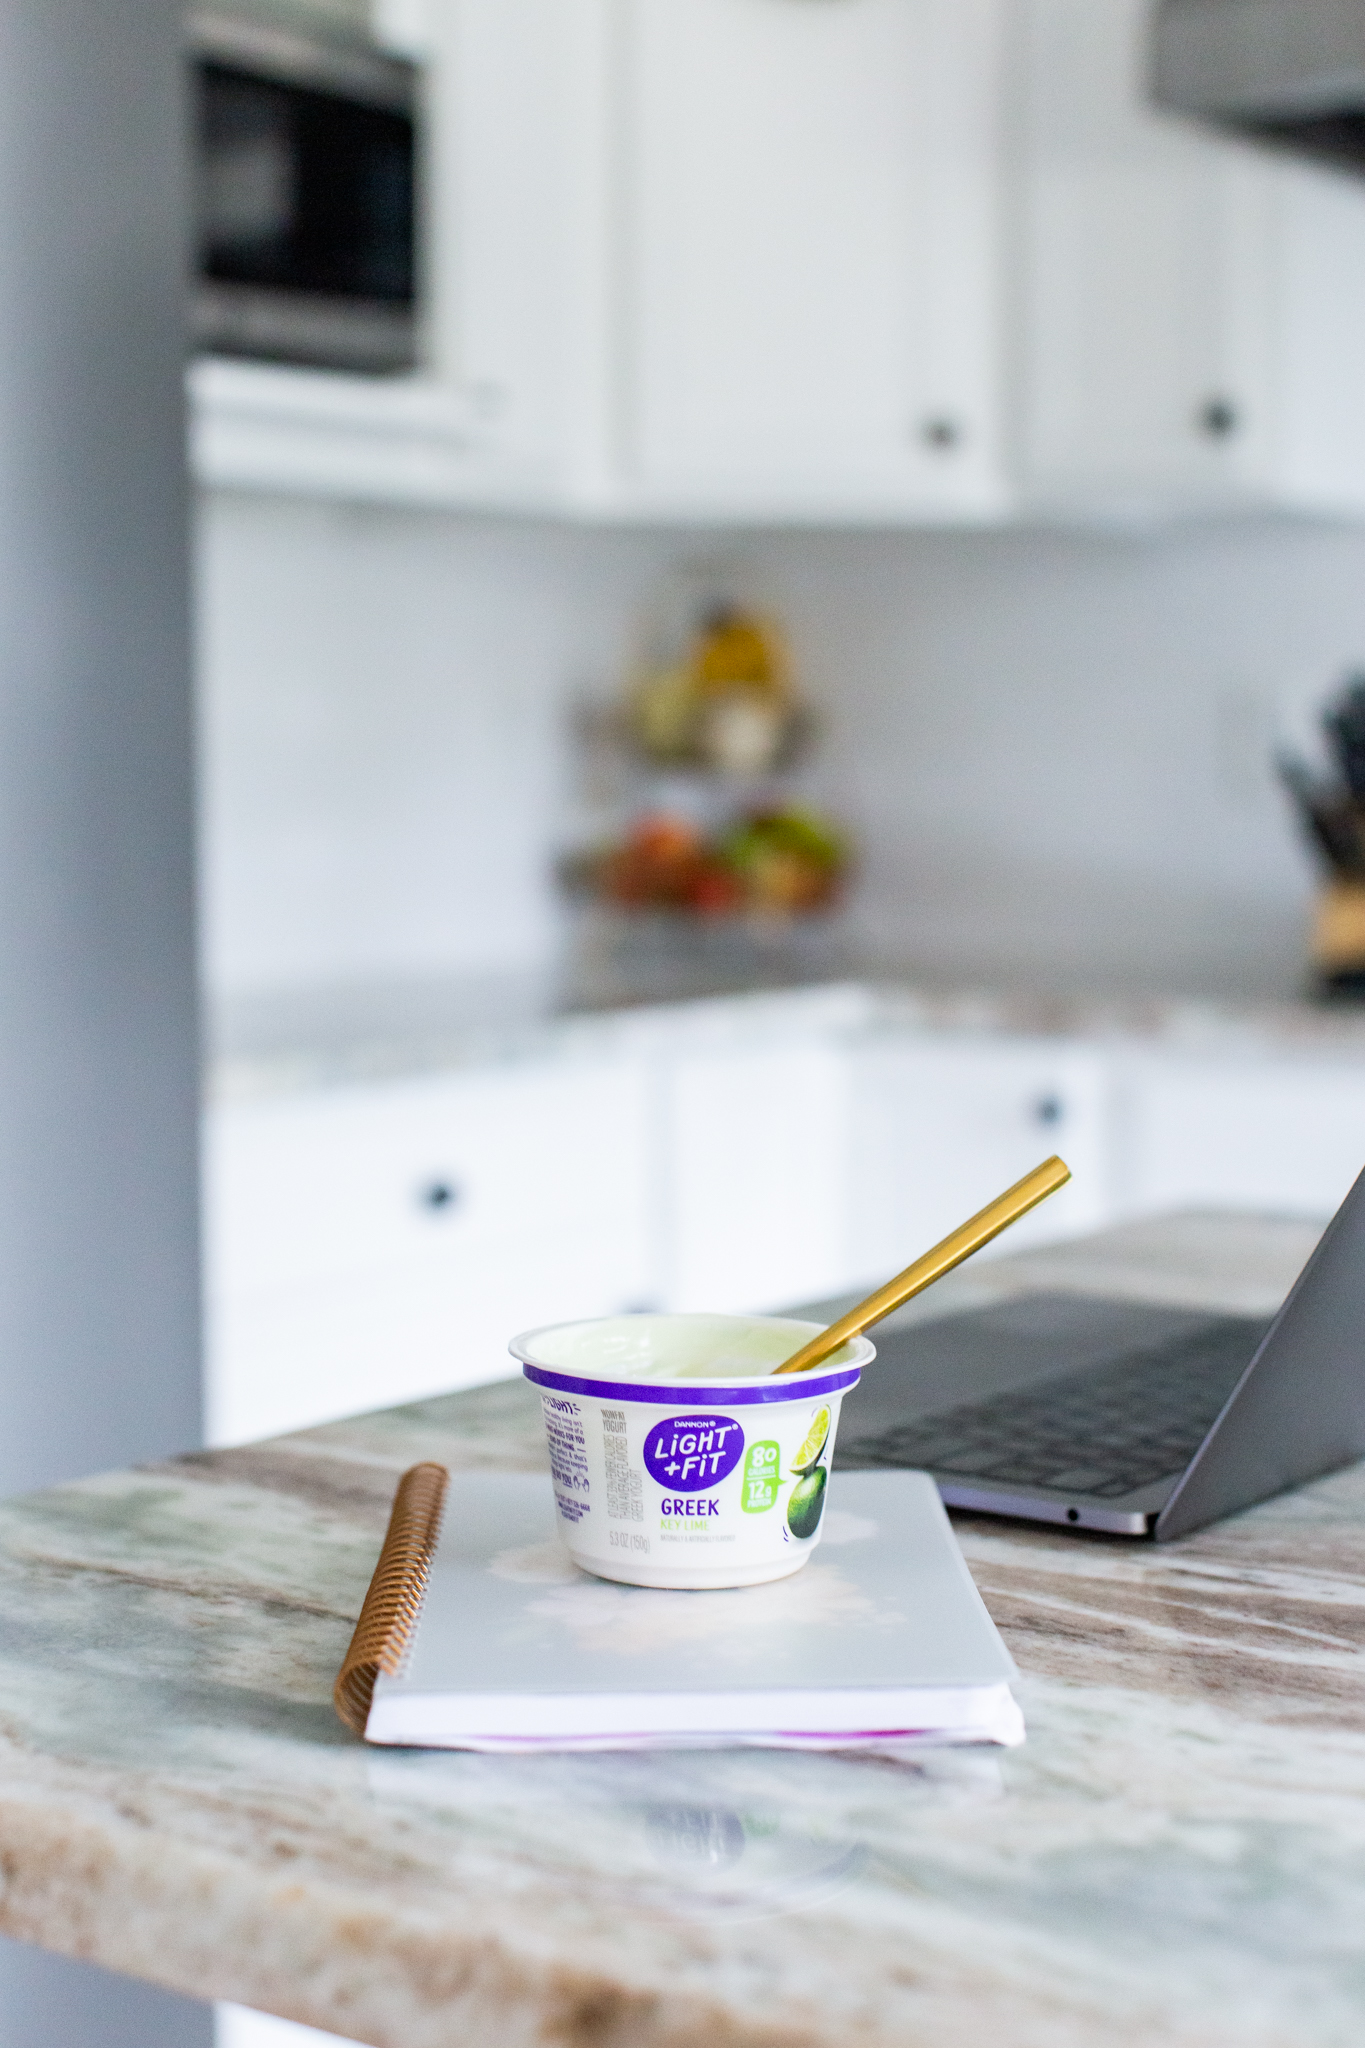 Making Goals by popular Ohio lifestyle blog, Coffee Beans and Bobby Pins: image of Danon Light + Fit Greek yogurt cup with a gold spoon in it. 